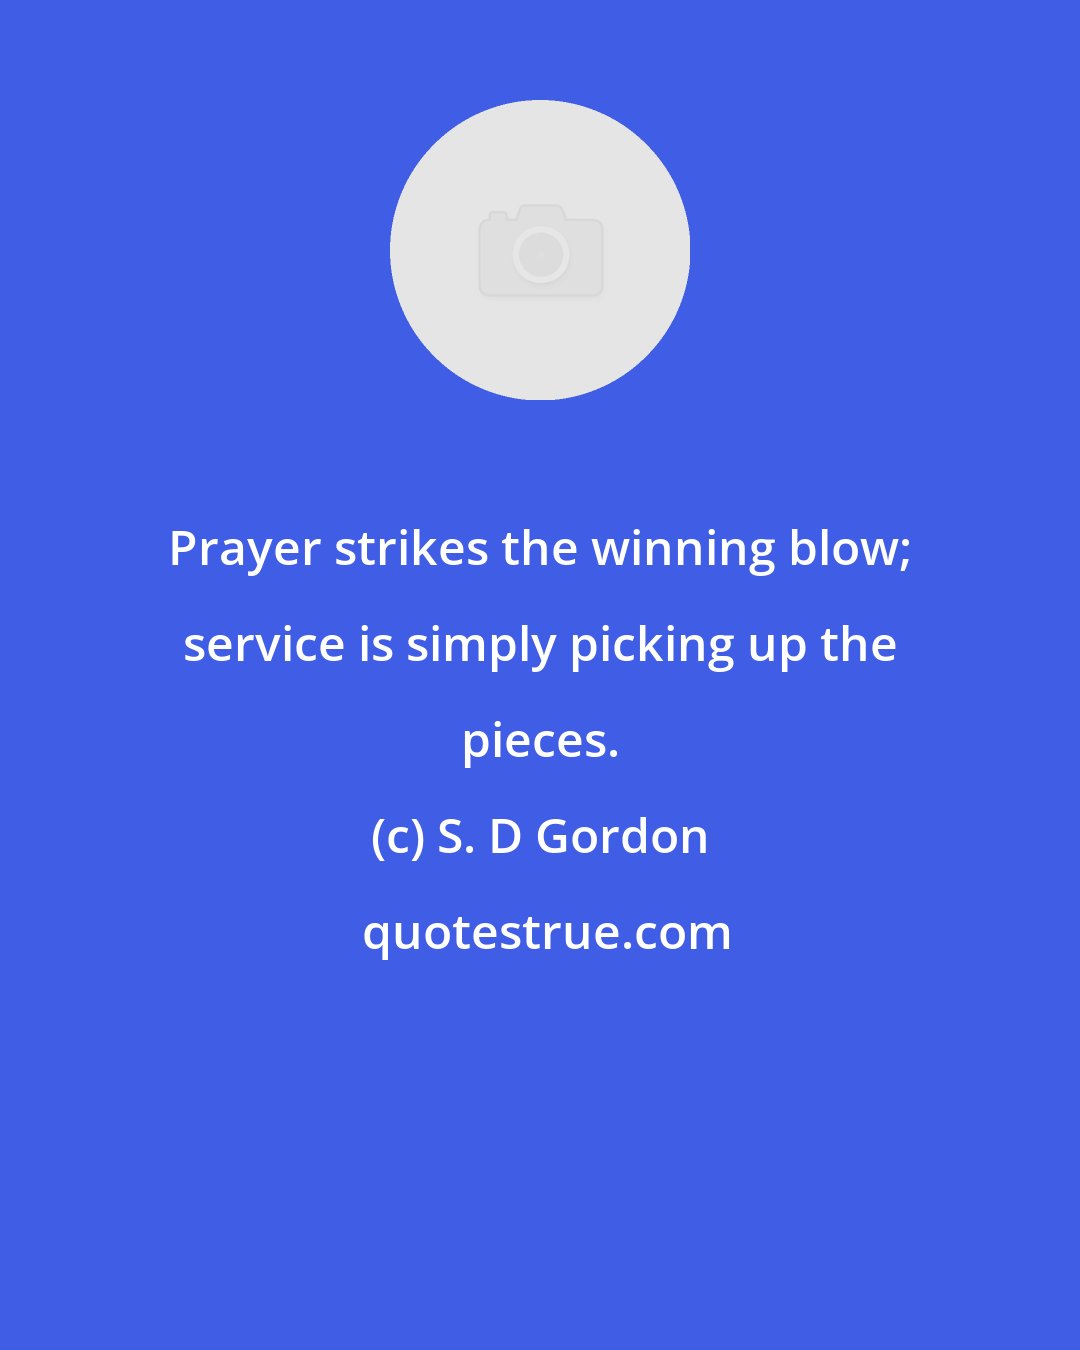 S. D Gordon: Prayer strikes the winning blow; service is simply picking up the pieces.